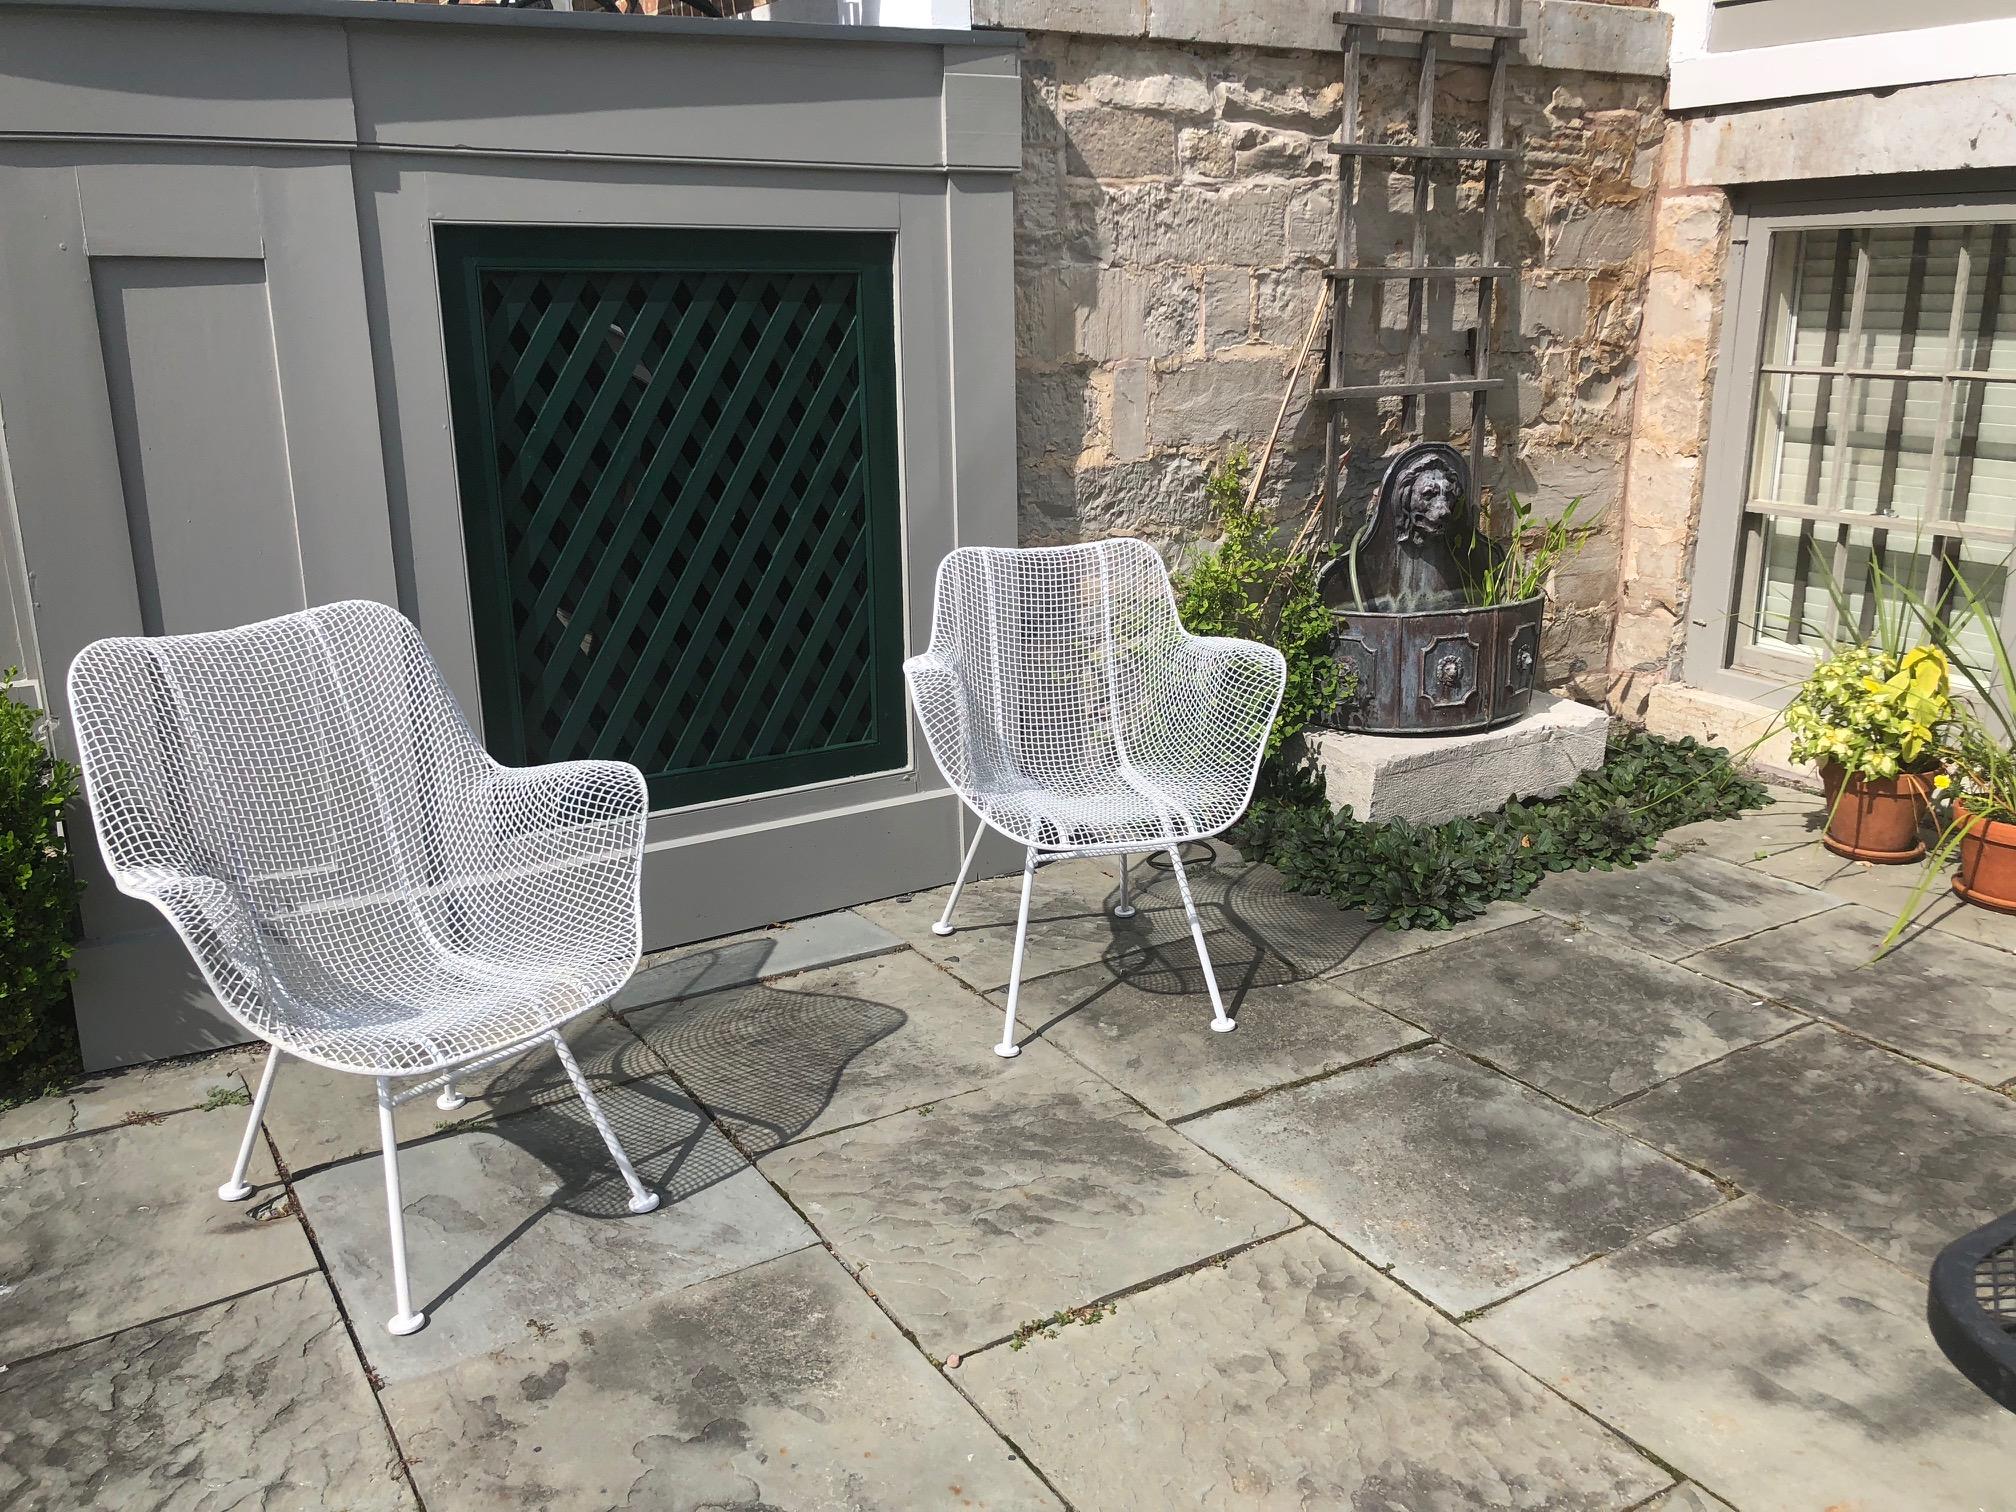 This stylish pair of Woodard patio chairs are from the 